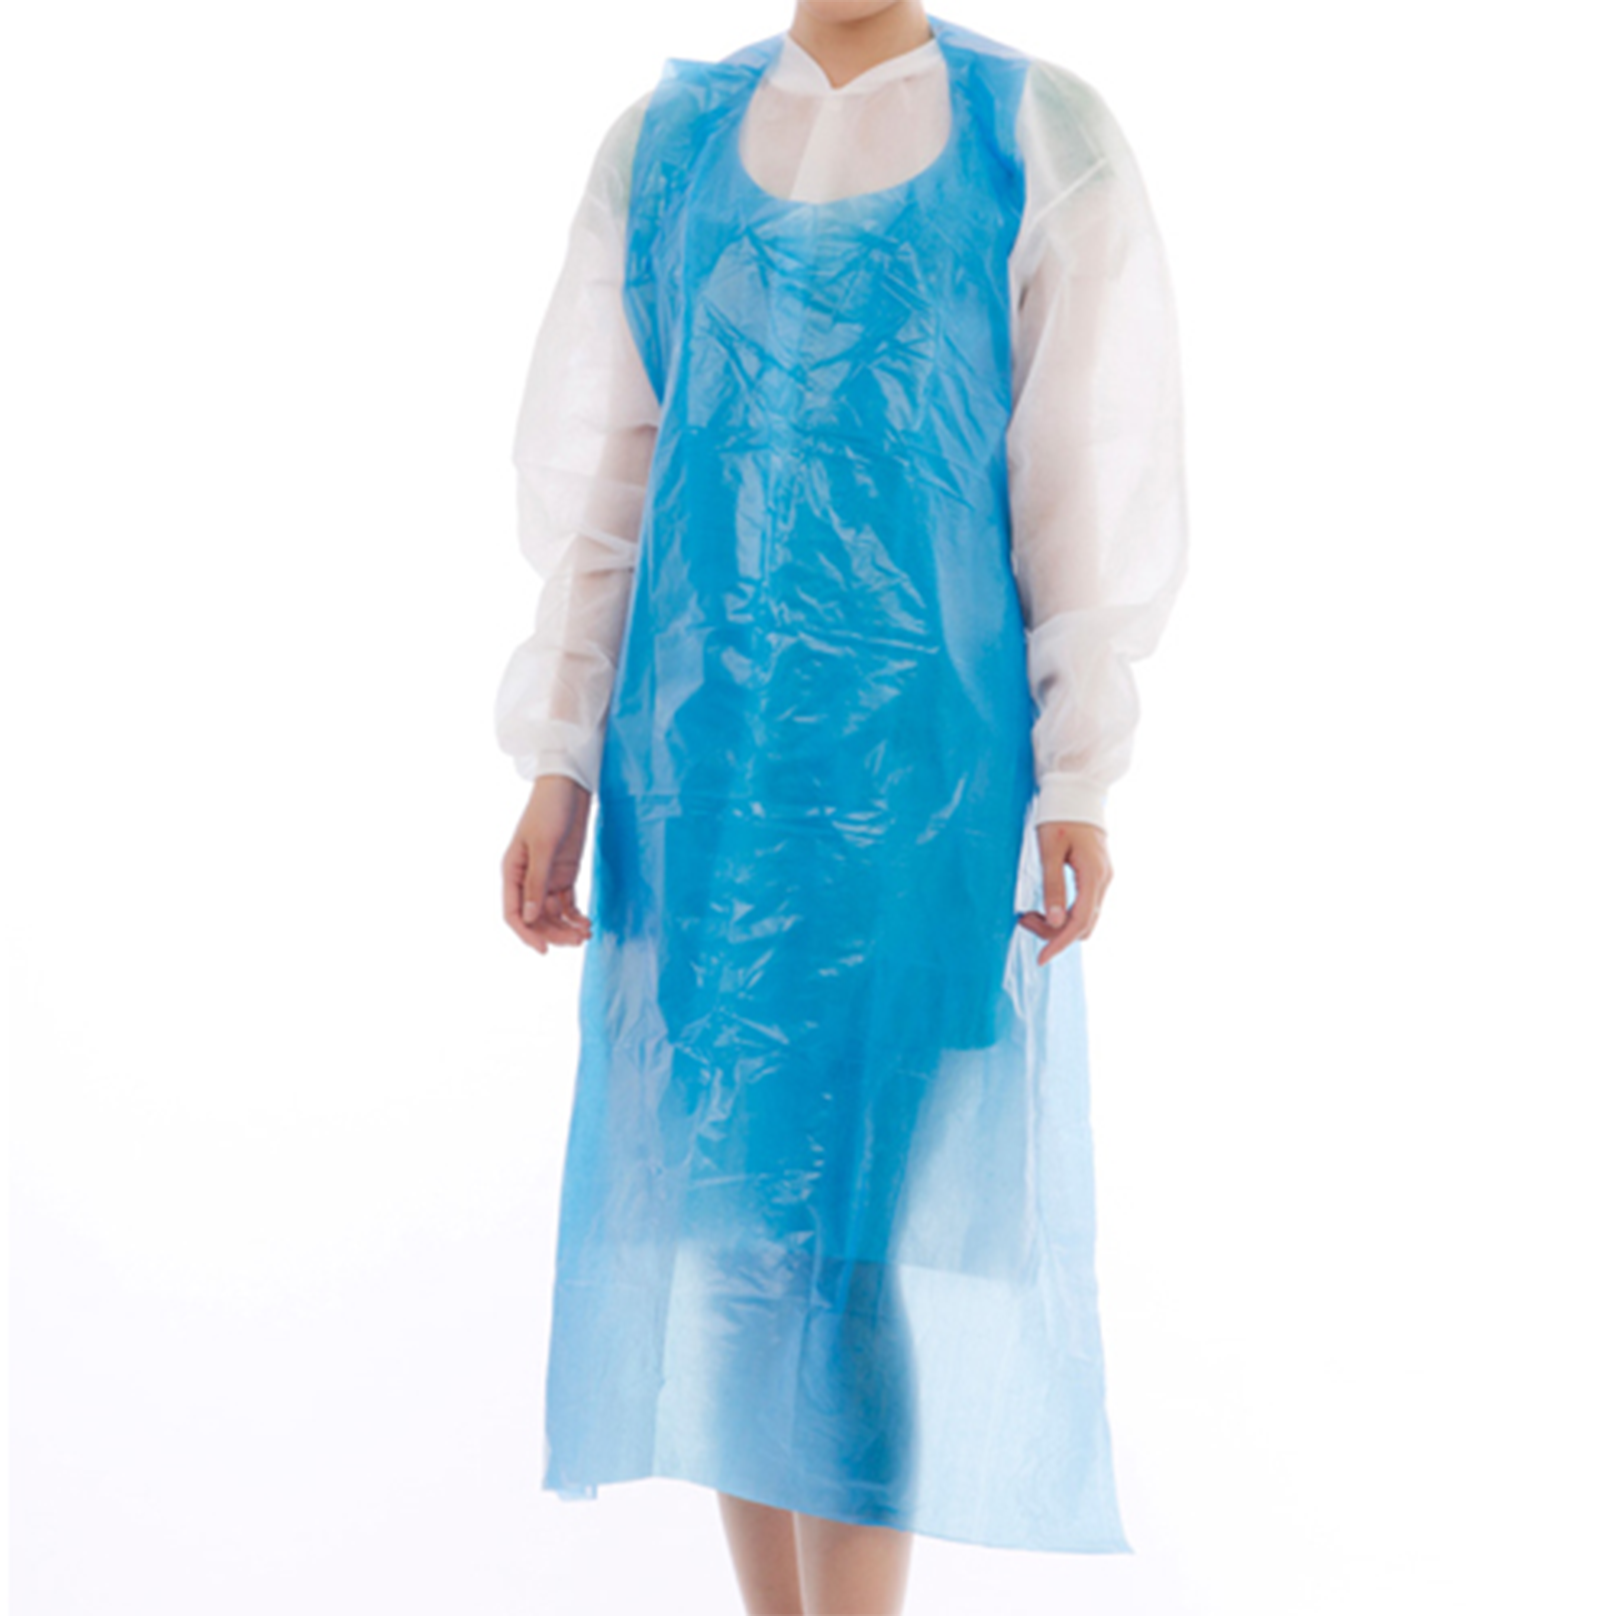 Stay Safe and Sanitary with PharmPak's Disposable Plastic Aprons